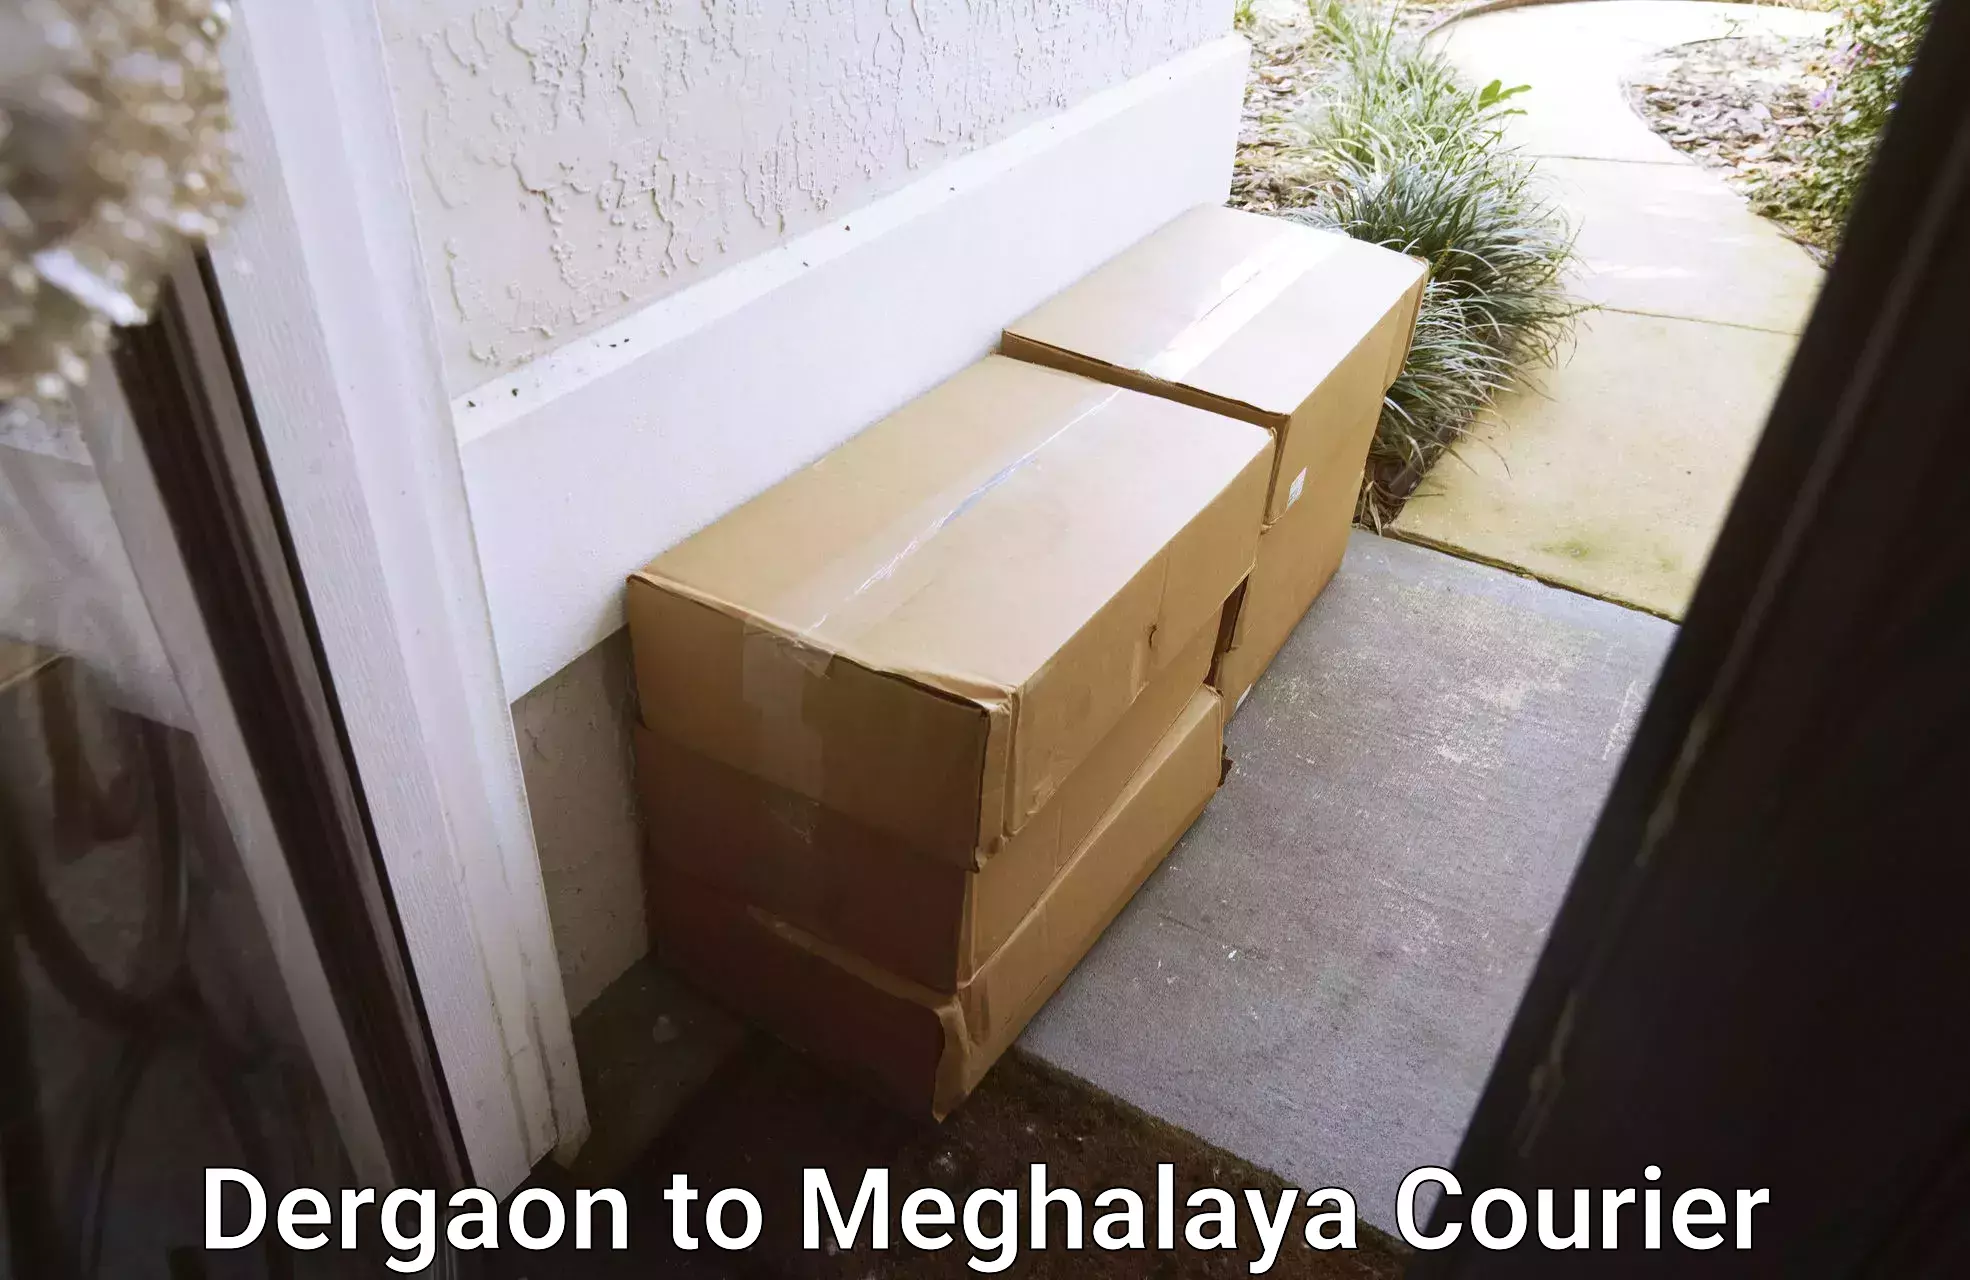 Express package services Dergaon to Meghalaya